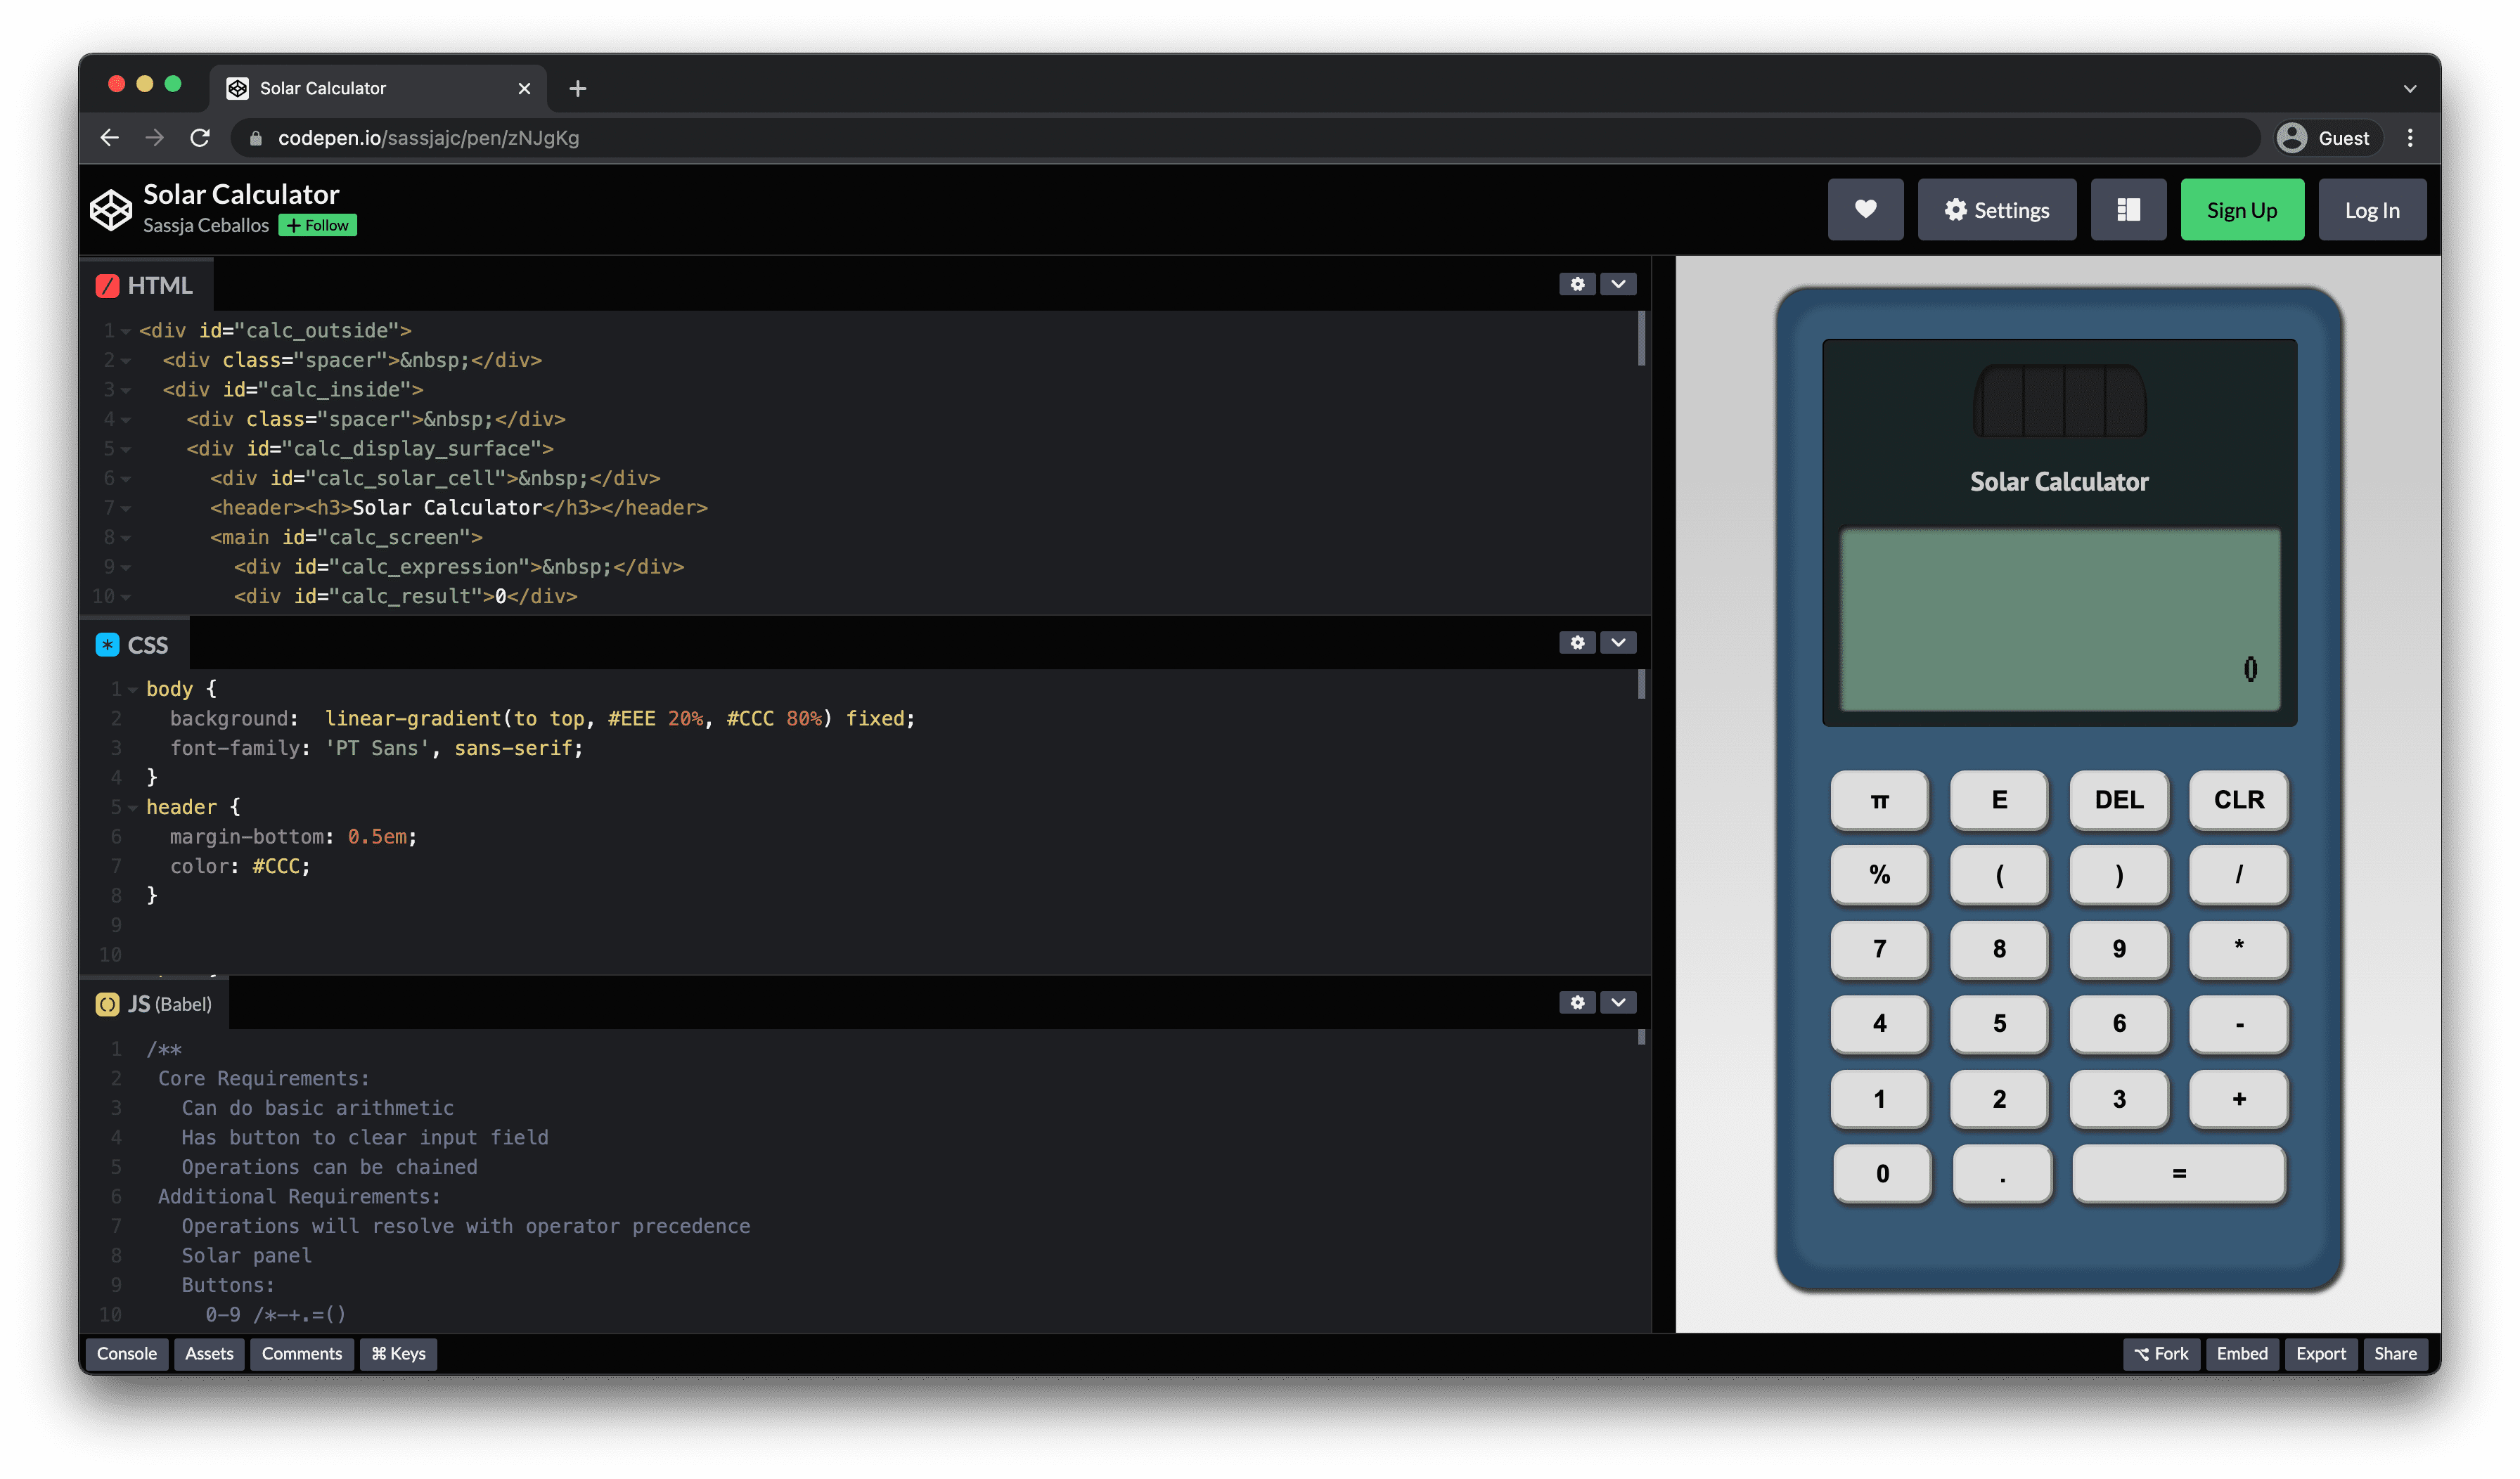 CodePen view with stacked HTML, CSS, and JS panels on the left and the calculator preview on the right.